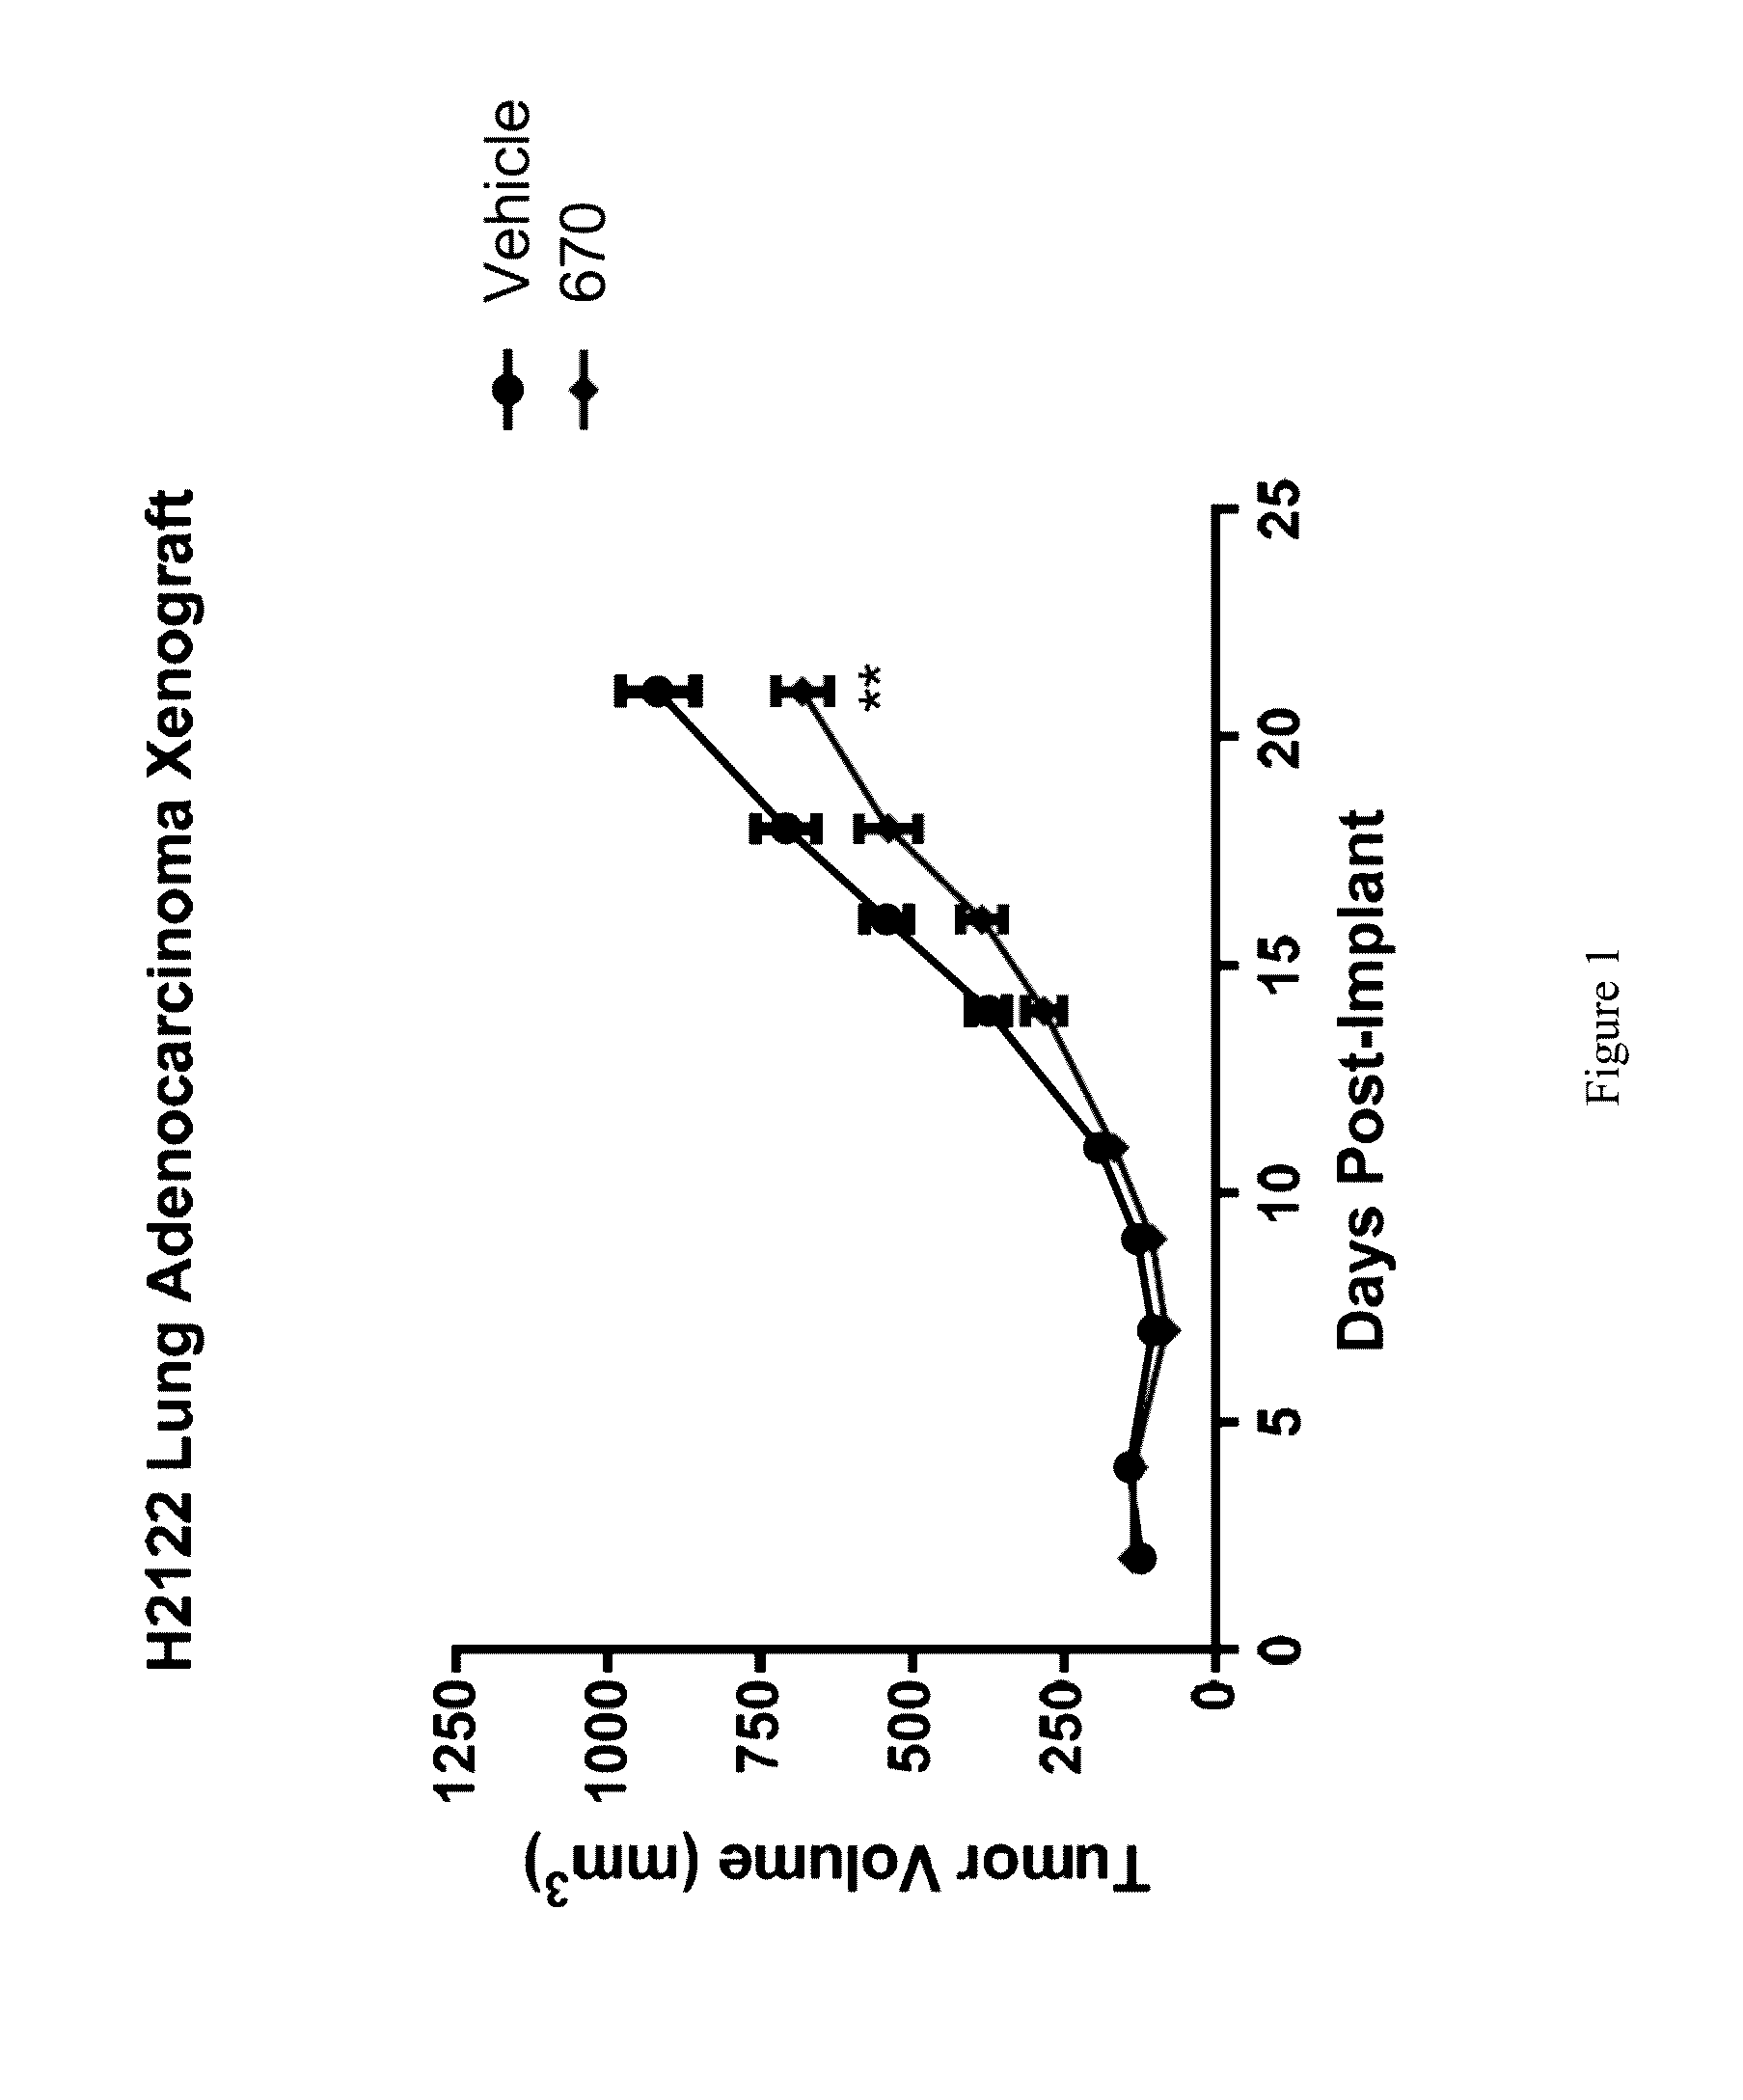 Treatment of Lung Cancer with Inhibitors of Glutaminase